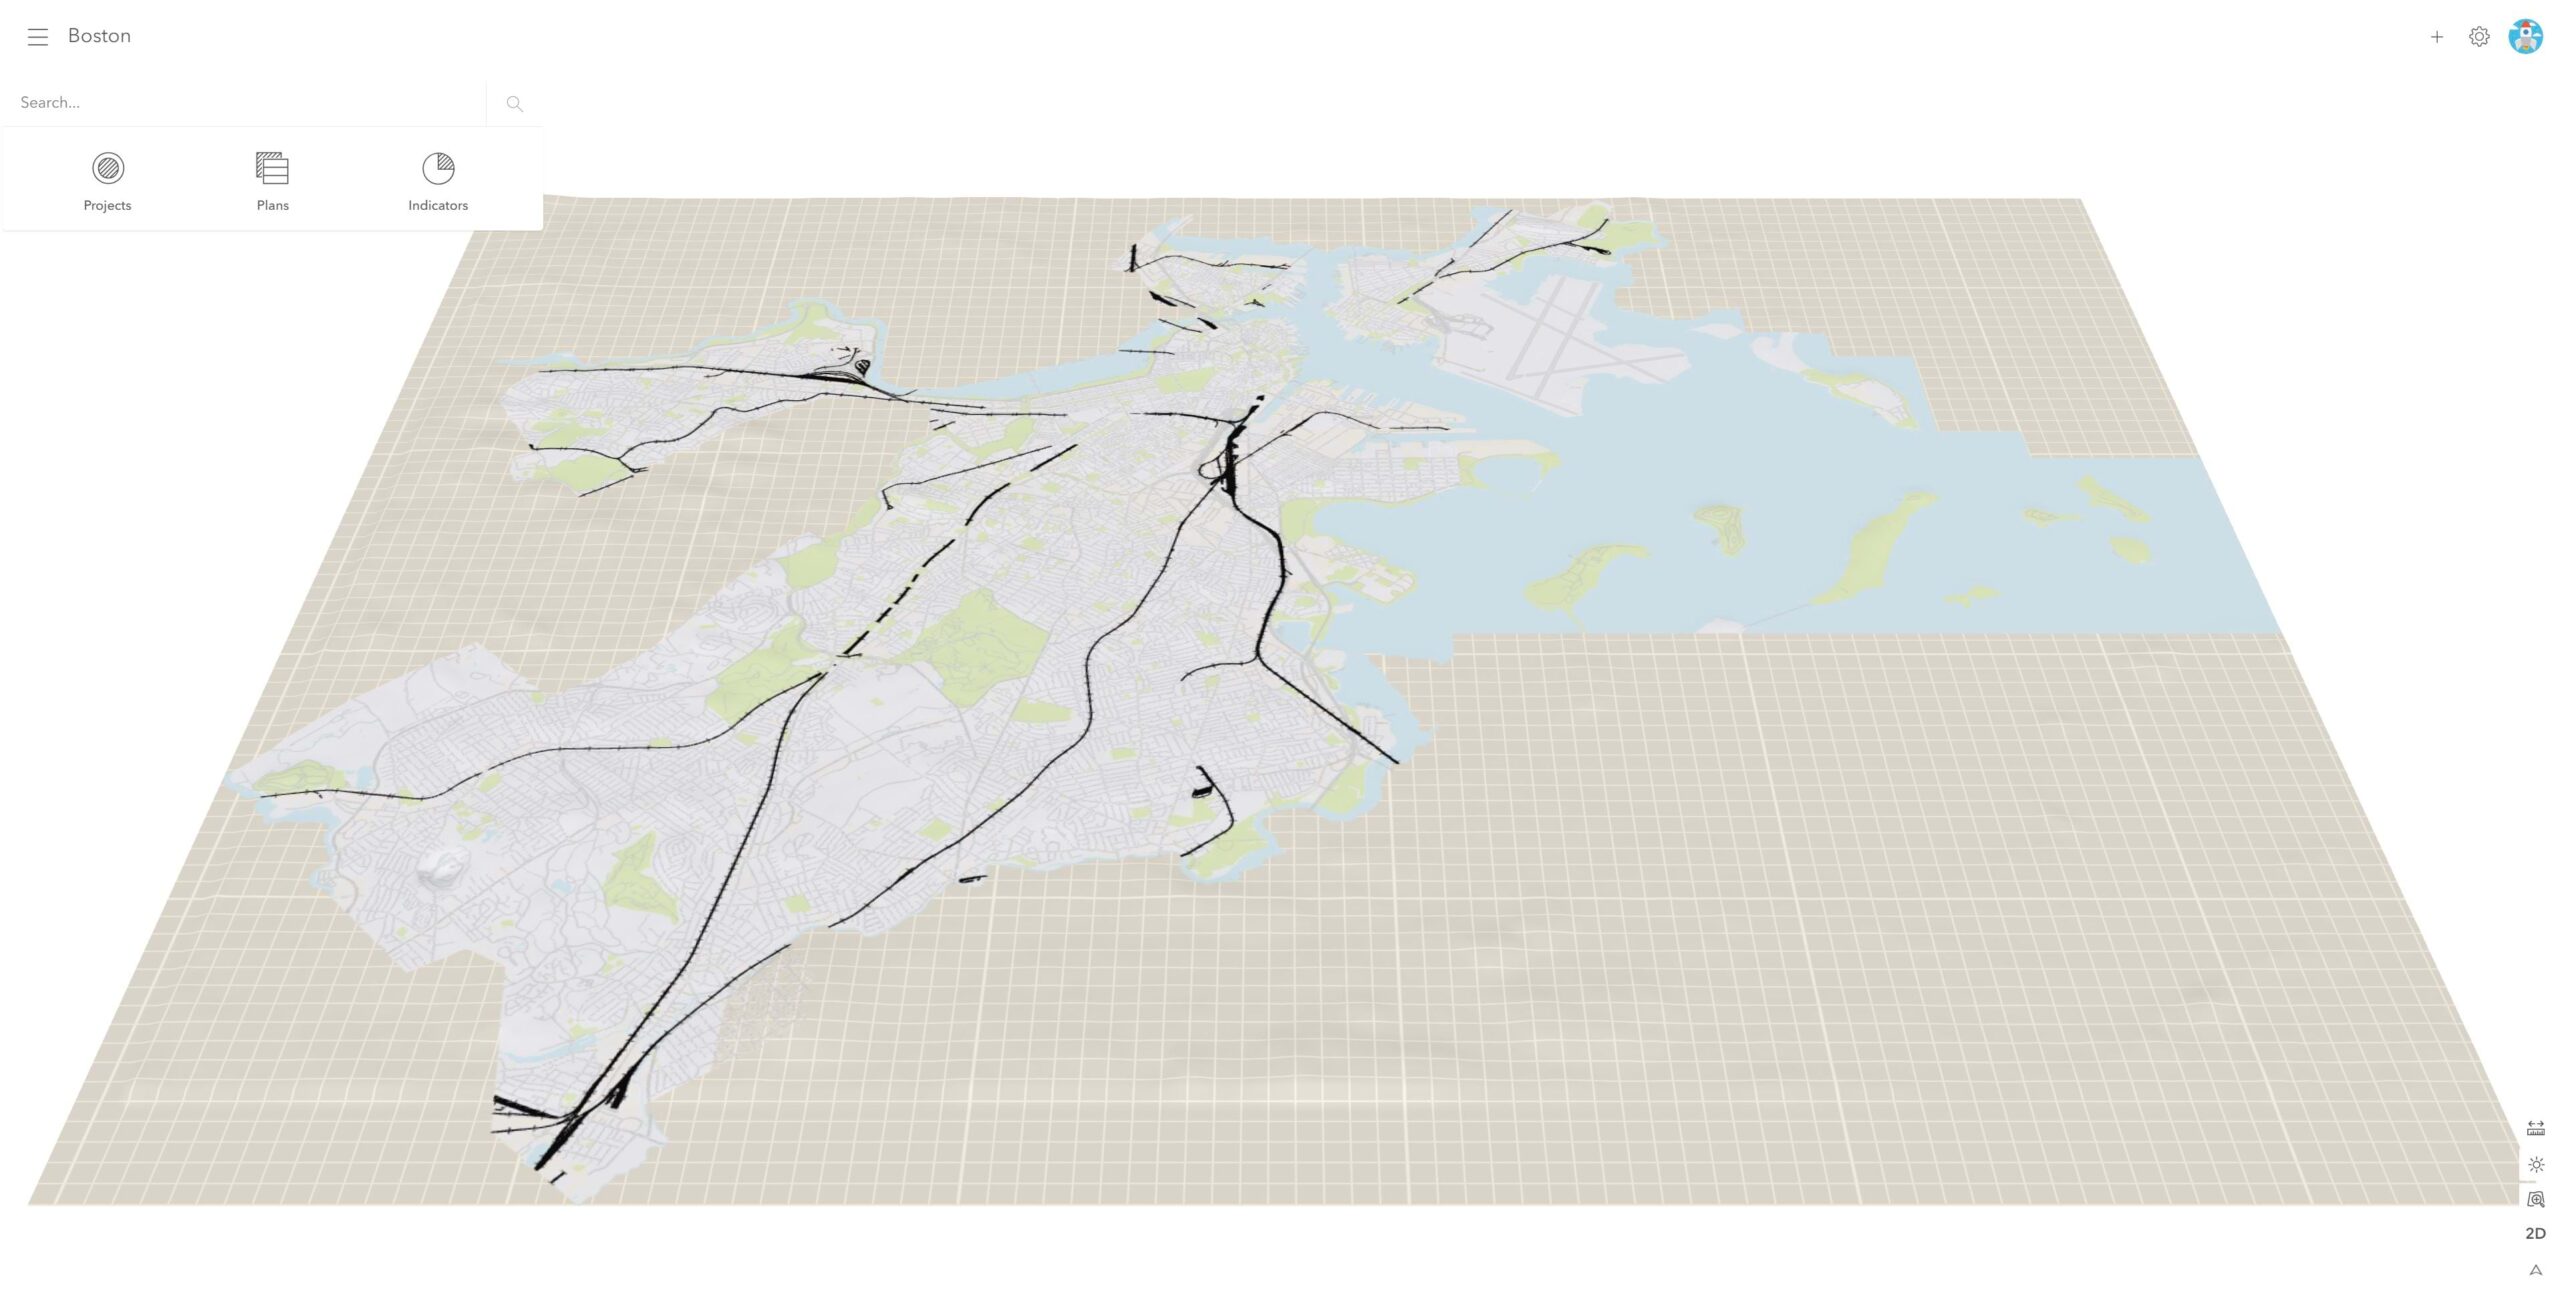 Basemap and elevation layer in ArcGIS Urban.